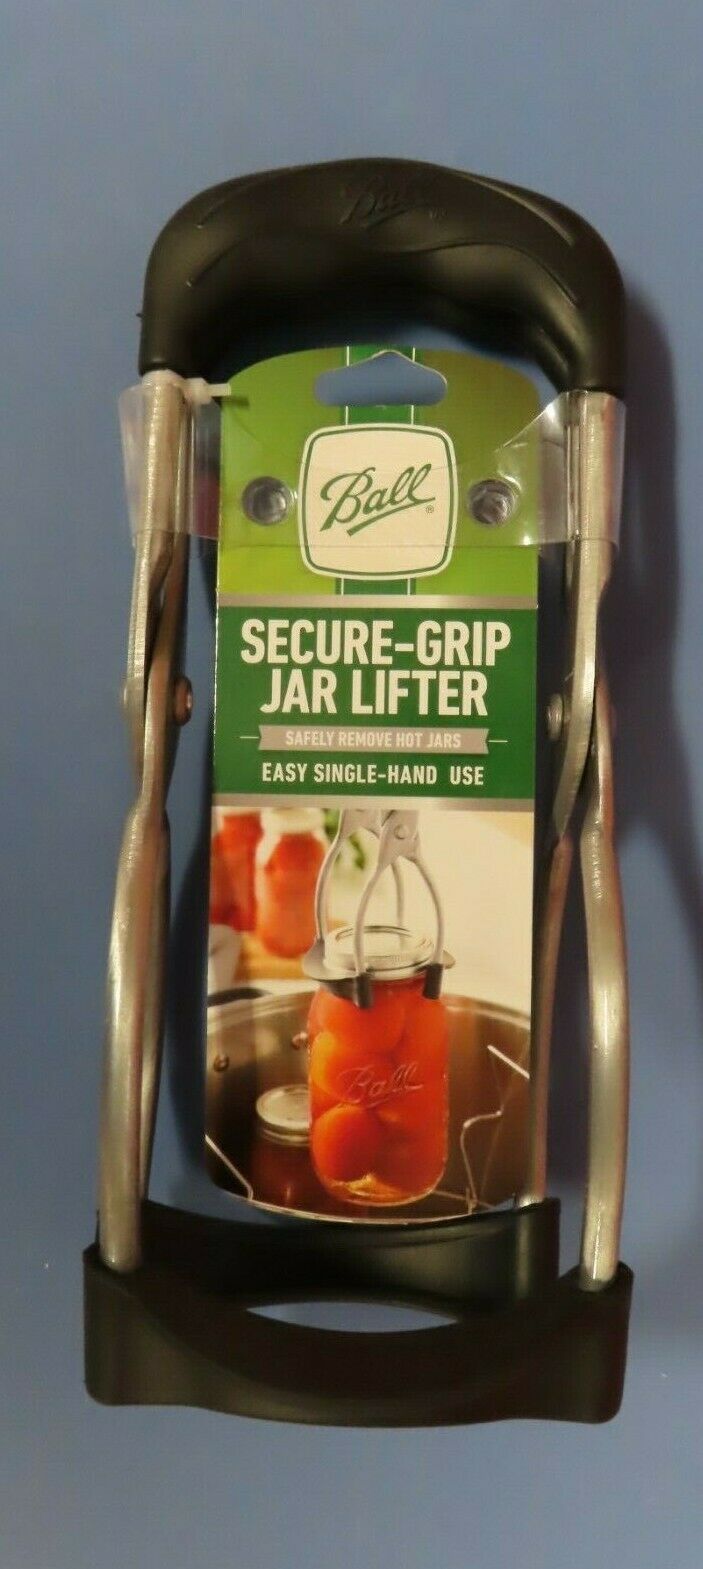 Ball Secure-Grip Jar Lifter #1440010731  Safely remove hot jars  Easy use  NEW